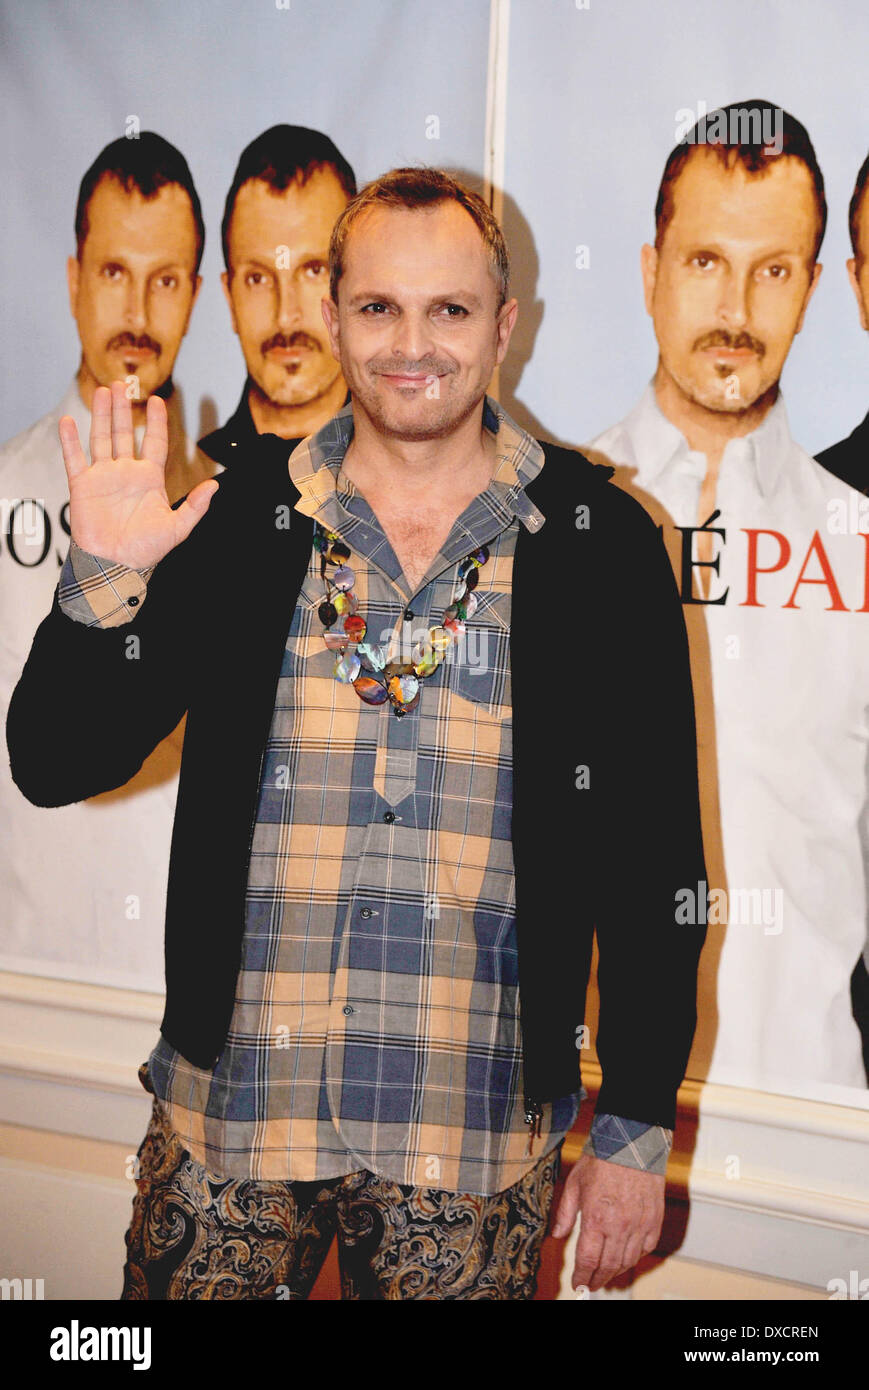 Miguel Bose promotes his new album 'Papitwo' at the Principe Di Savoia Hotel Featuring: Miguel Bose Where: Milan, Italy When: 0 Stock Photo